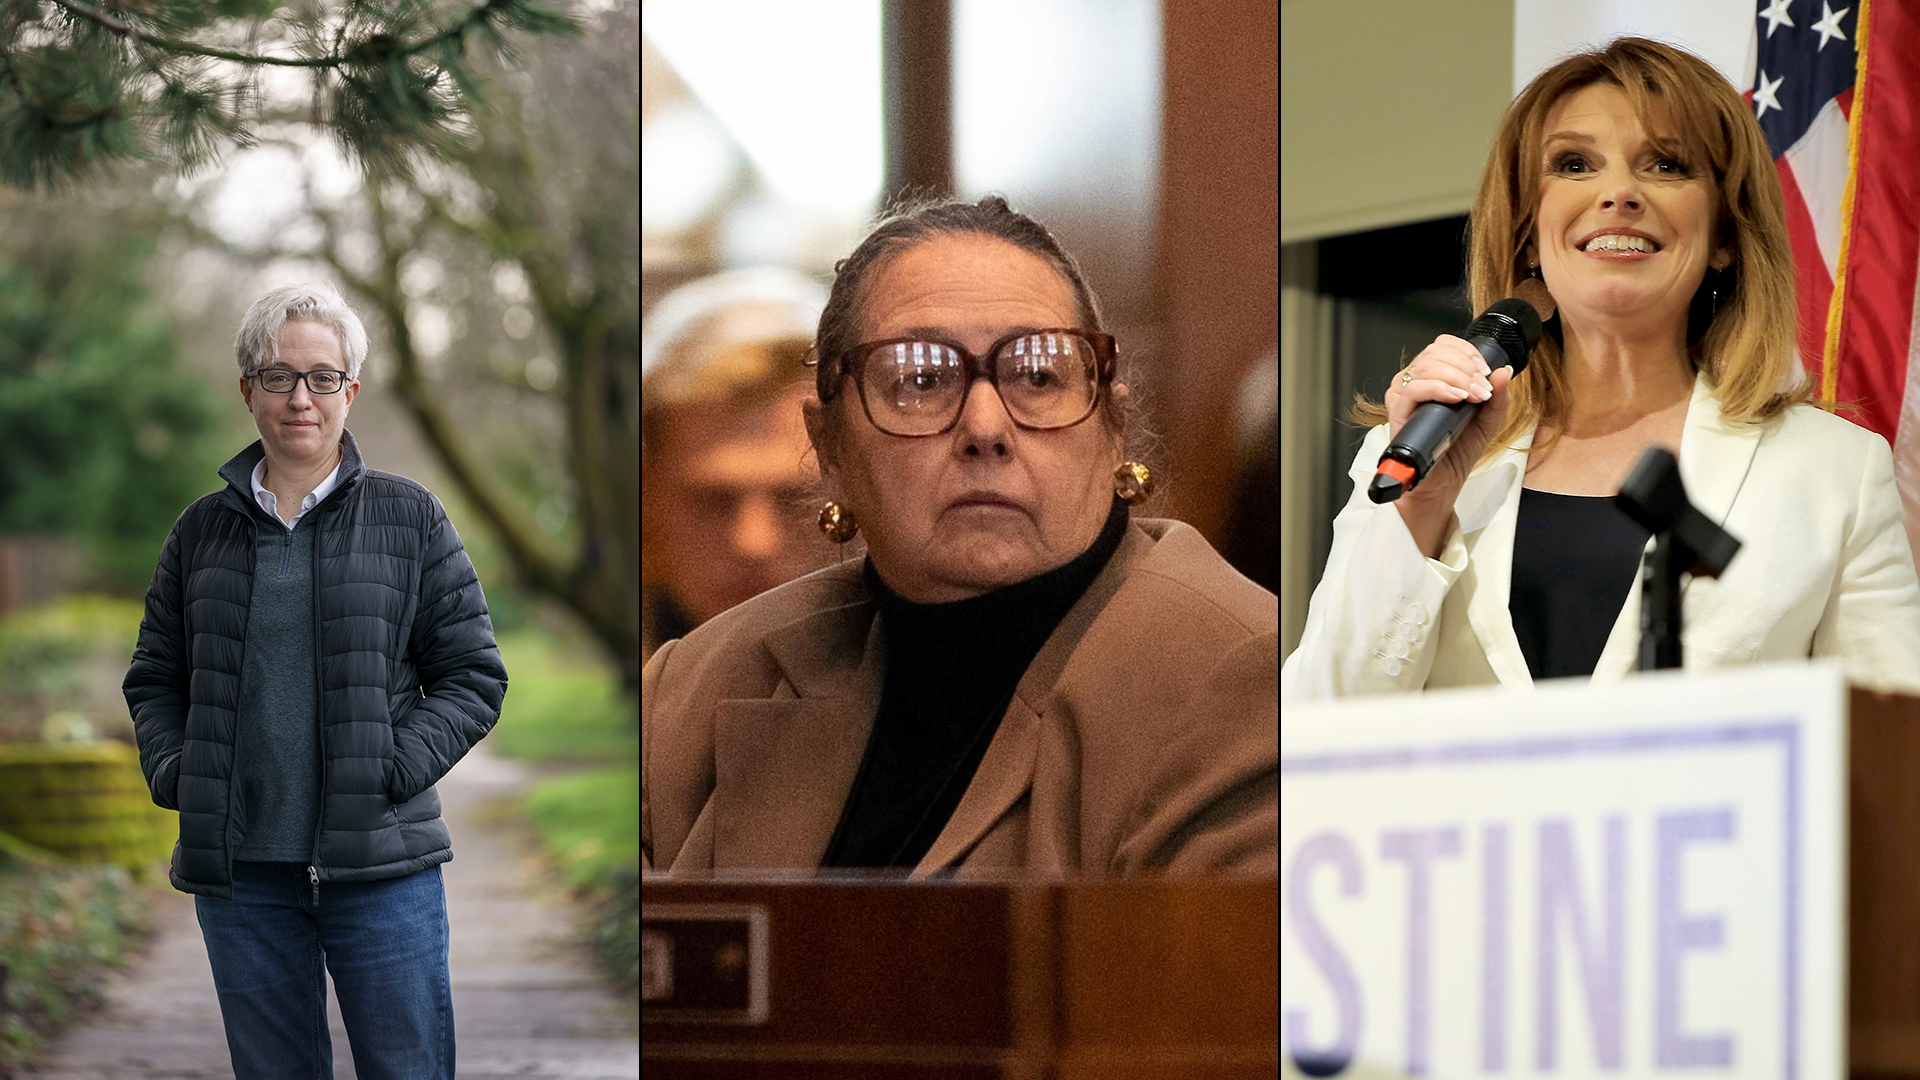 A compilation of photos of the three major candidates for Oregon governor. From left to right: Tina Kotek, Betsy Johnson and Christine Drazan.